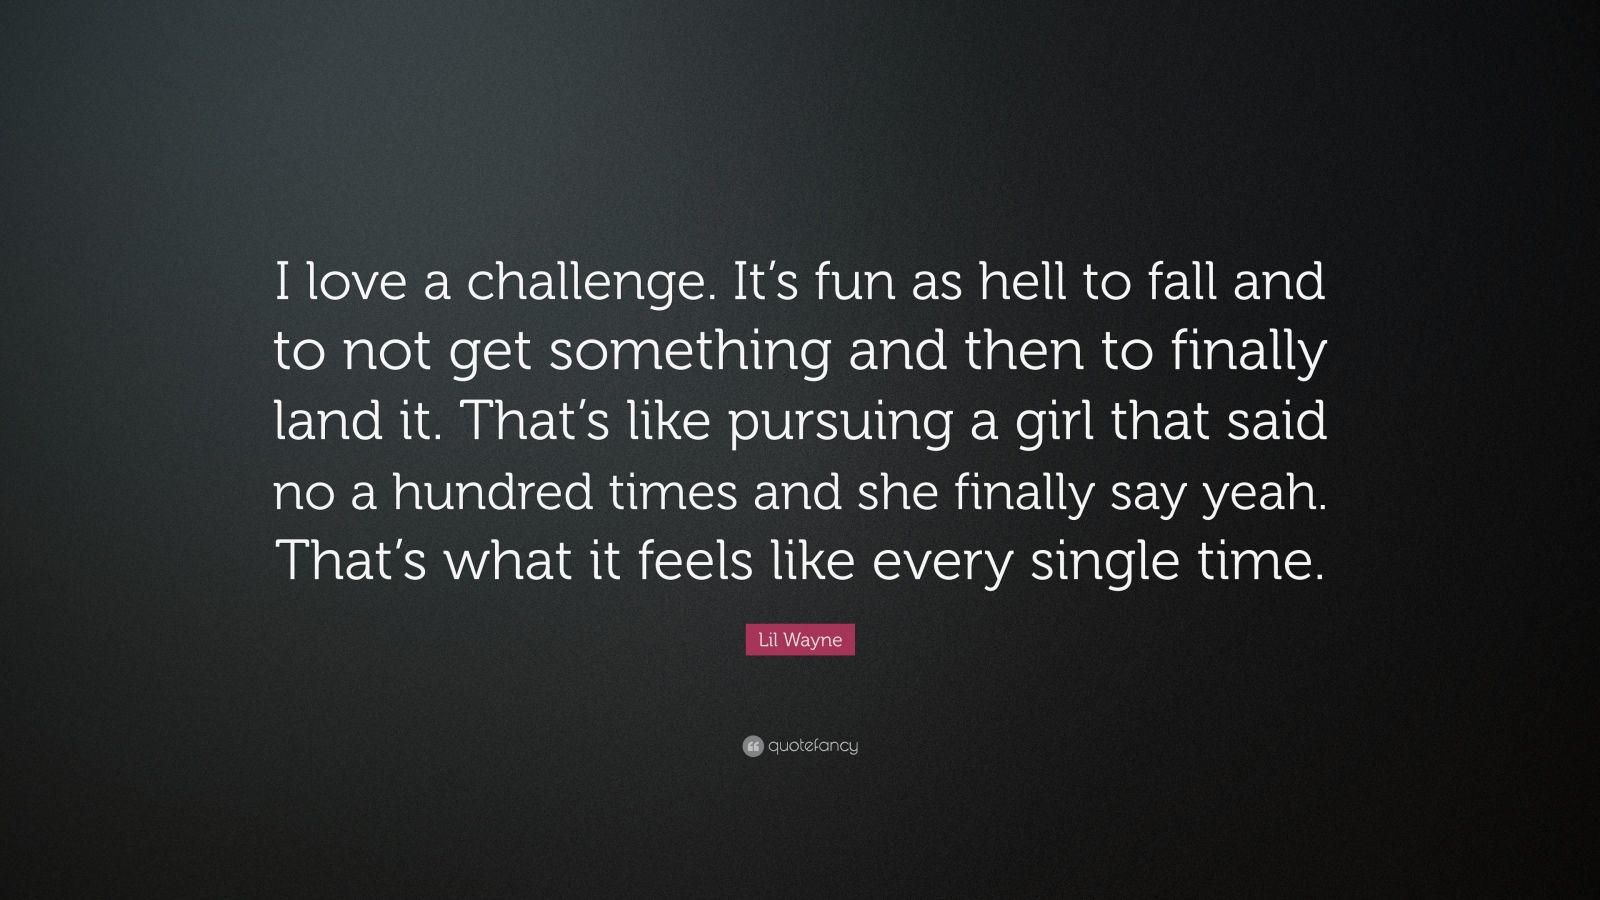 Lil Wayne Quote I love a challenge It s fun as hell to fall